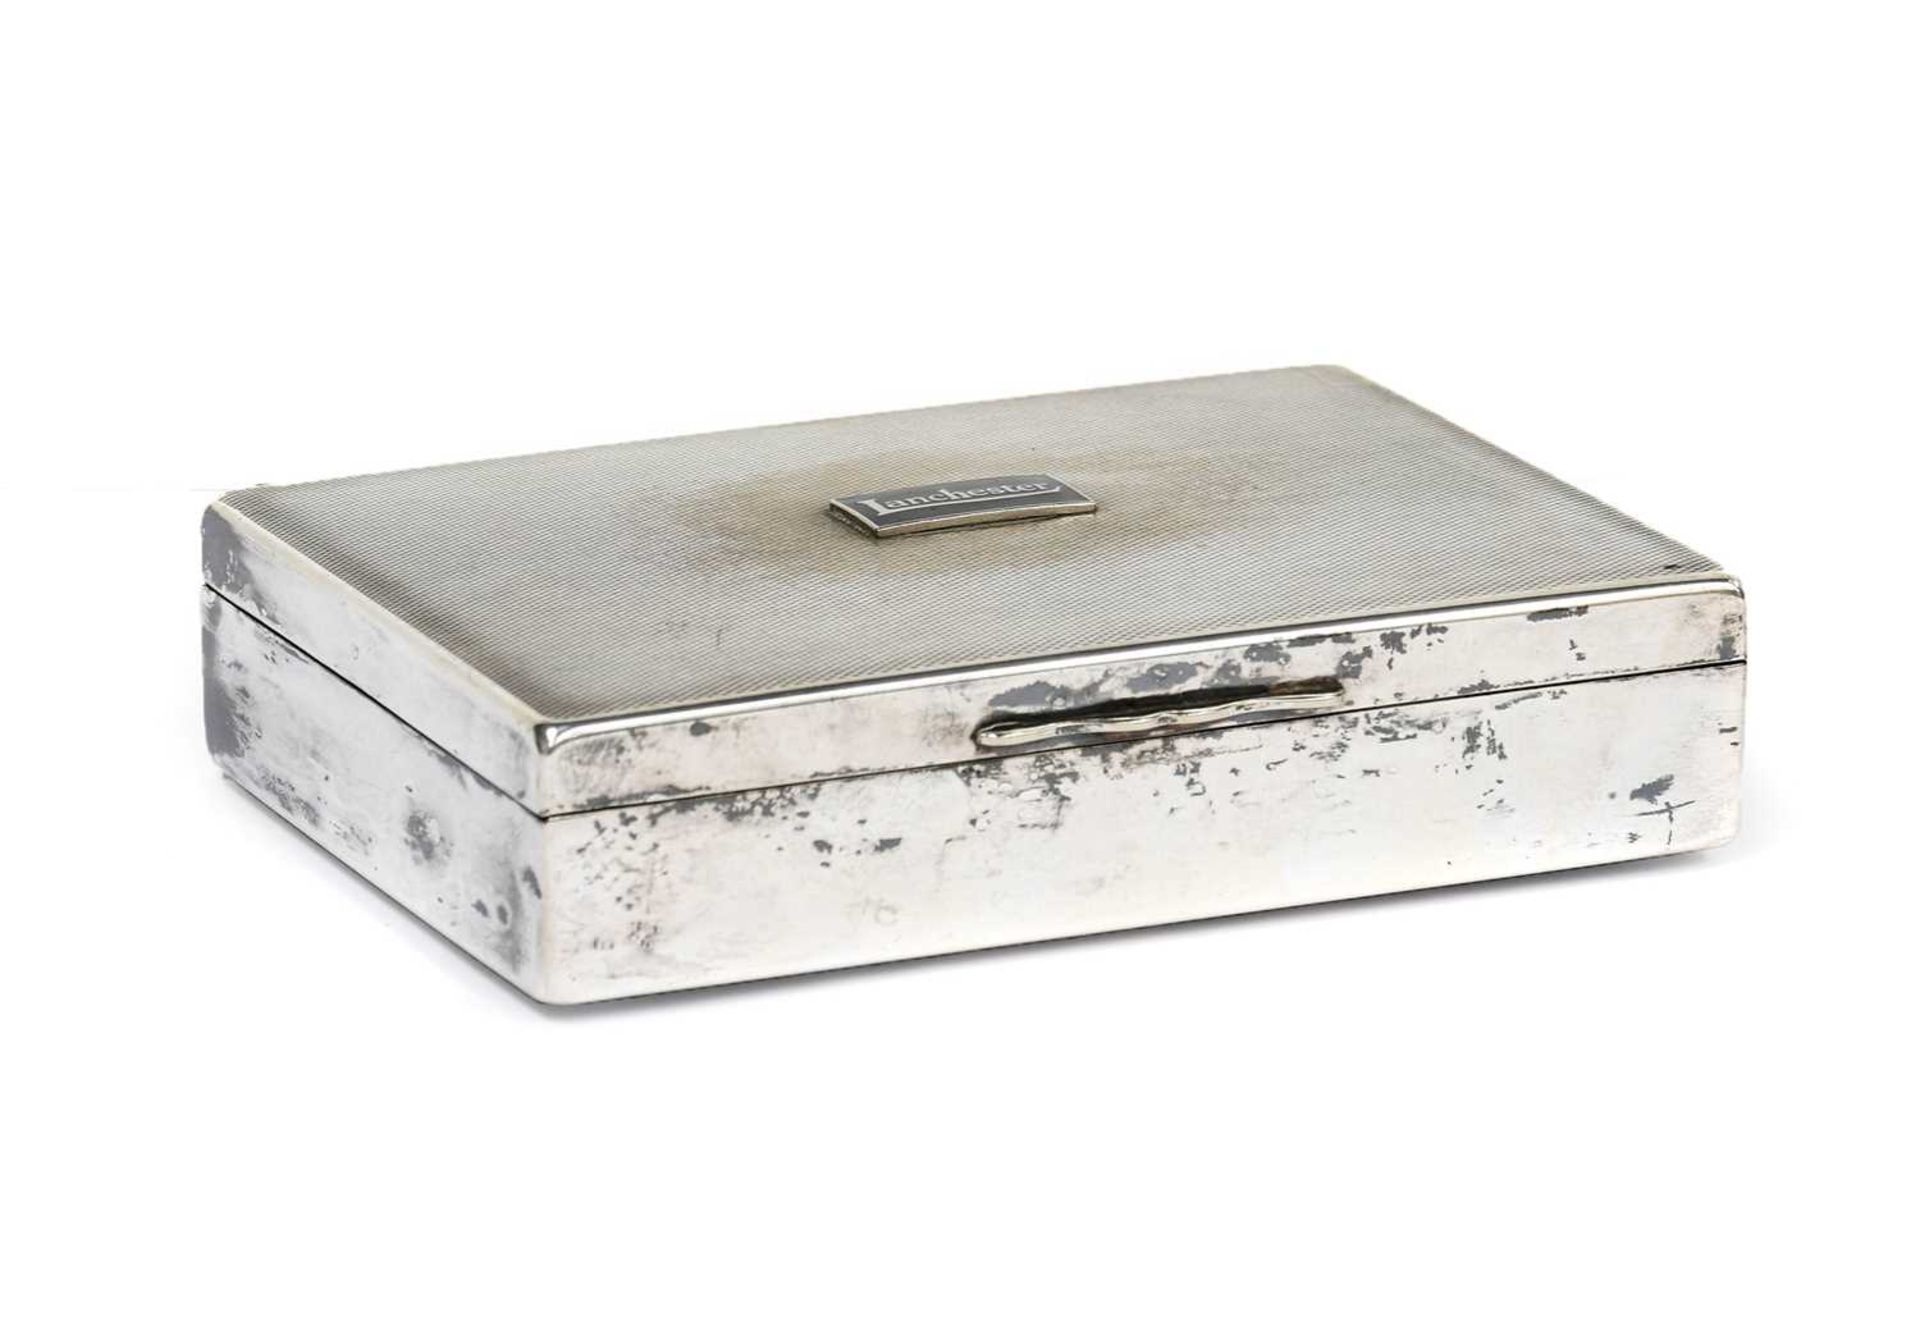 A 1930's Chrome Plated Desktop Cigarette Box, to promote Lanchester Cars of England, with an